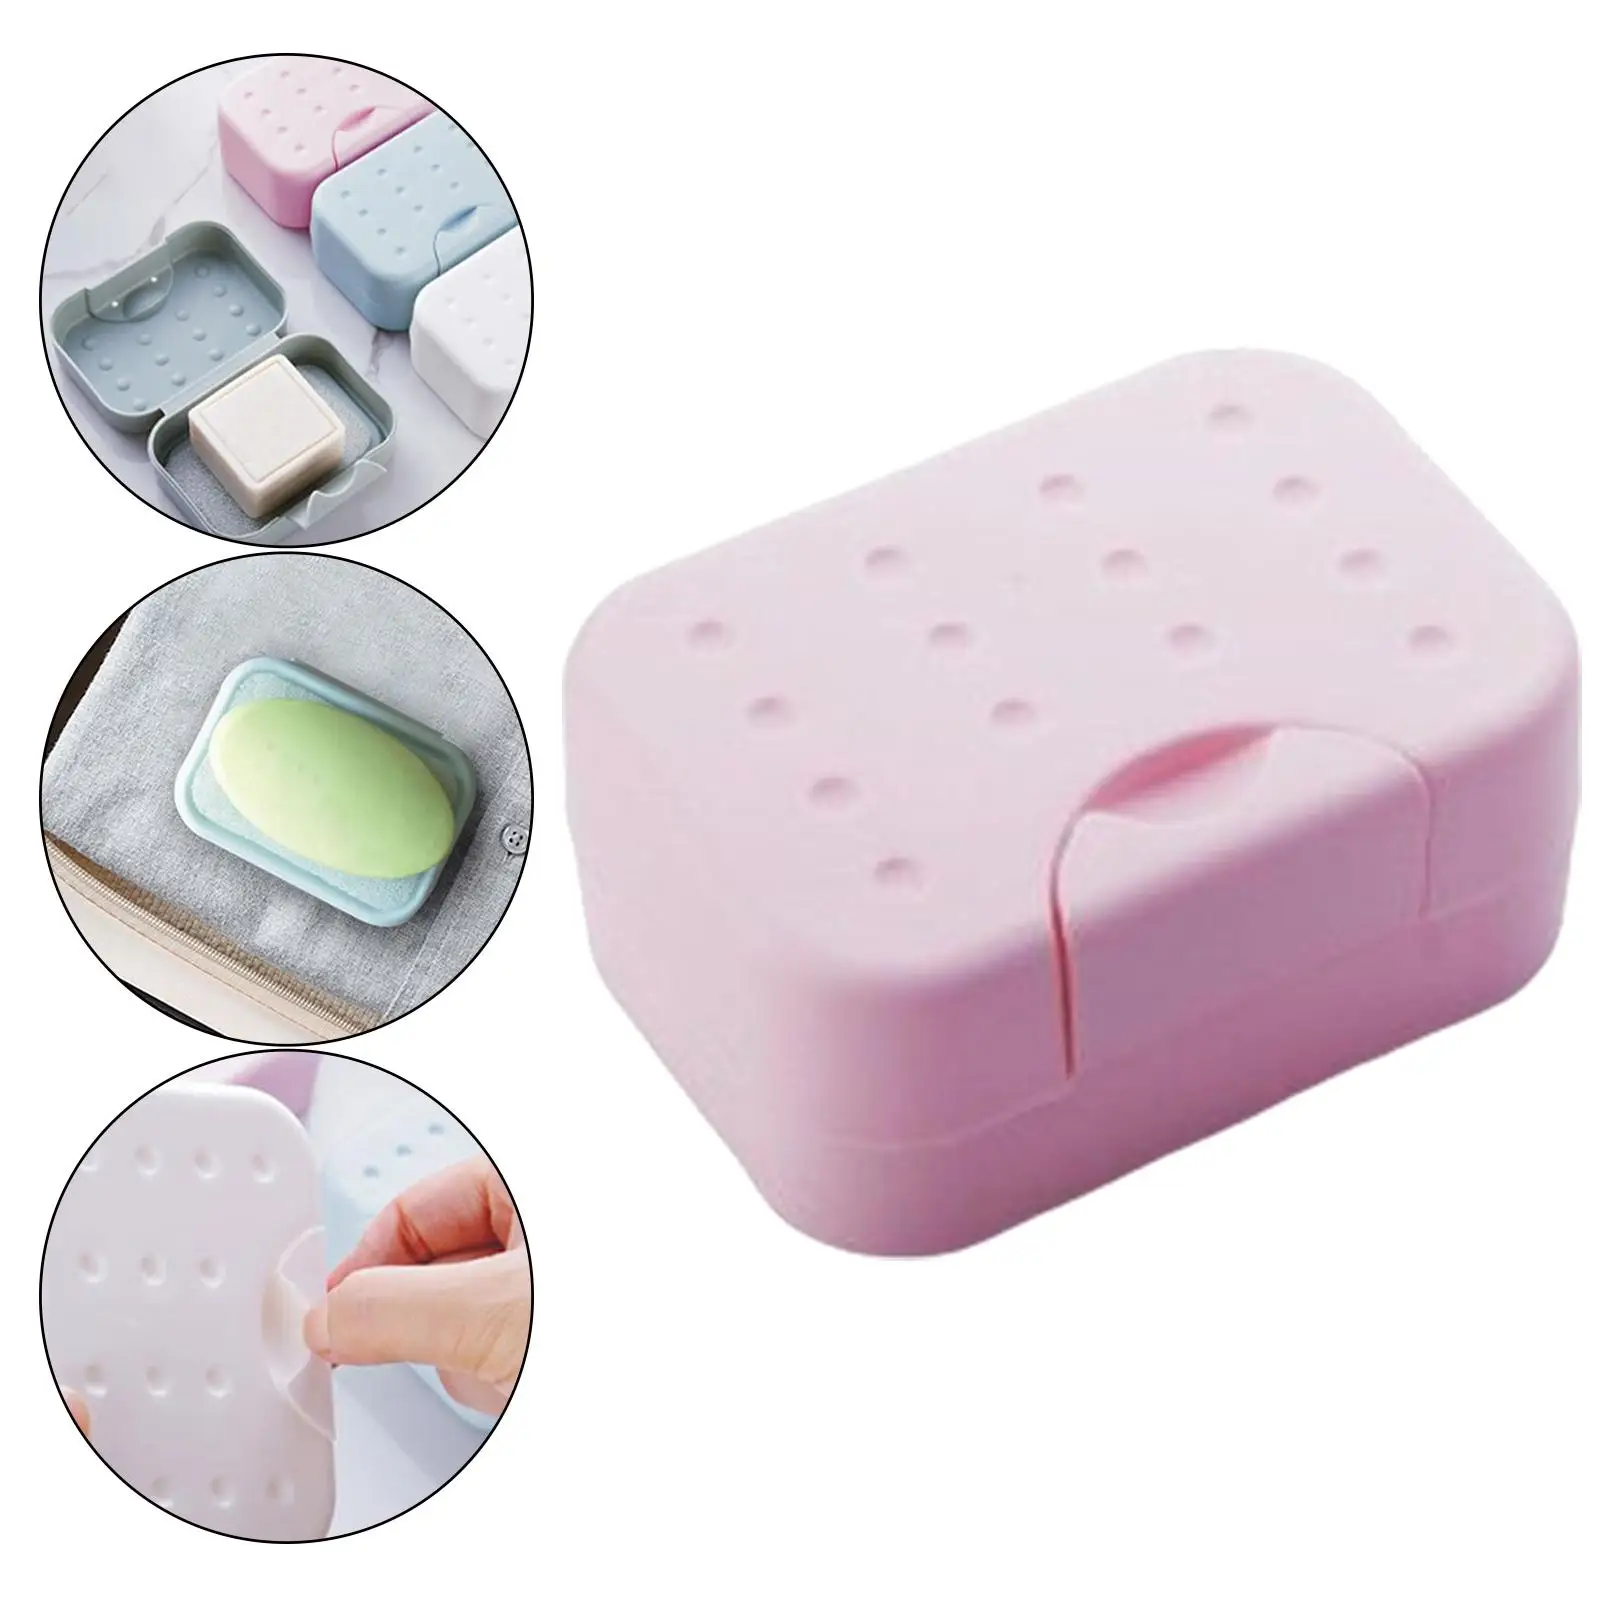 Portable Travel Soap Box Container Case Dish Holder for Camping School Shower with Lid Sealed Waterproof